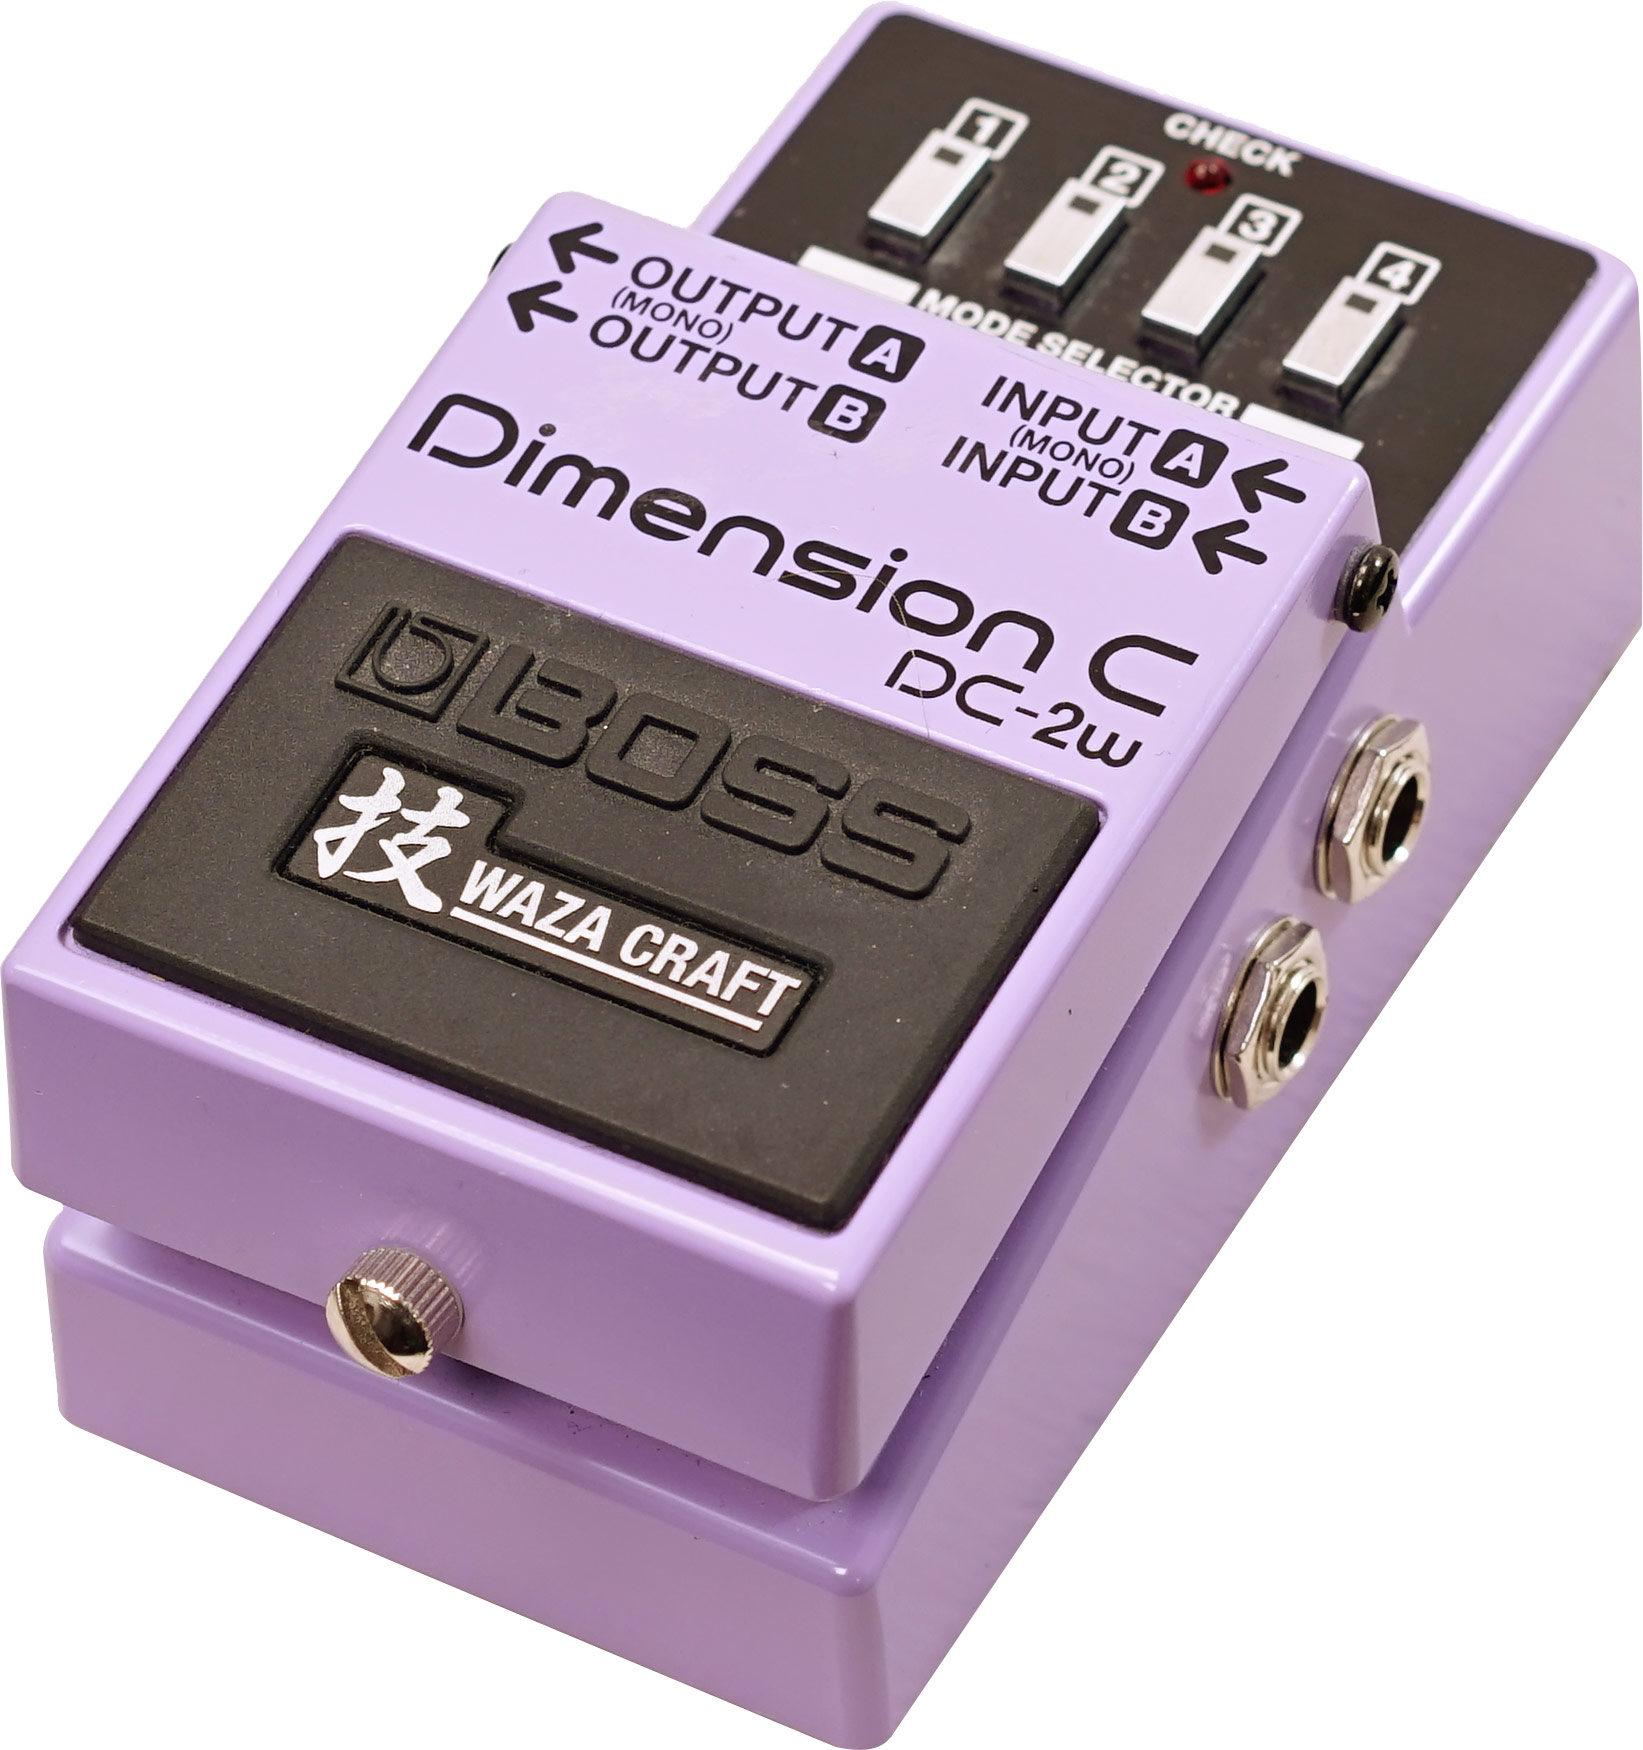 BOSS DC-2W Dimension C Waza Craft Chorus Pedal (Pre-Owned